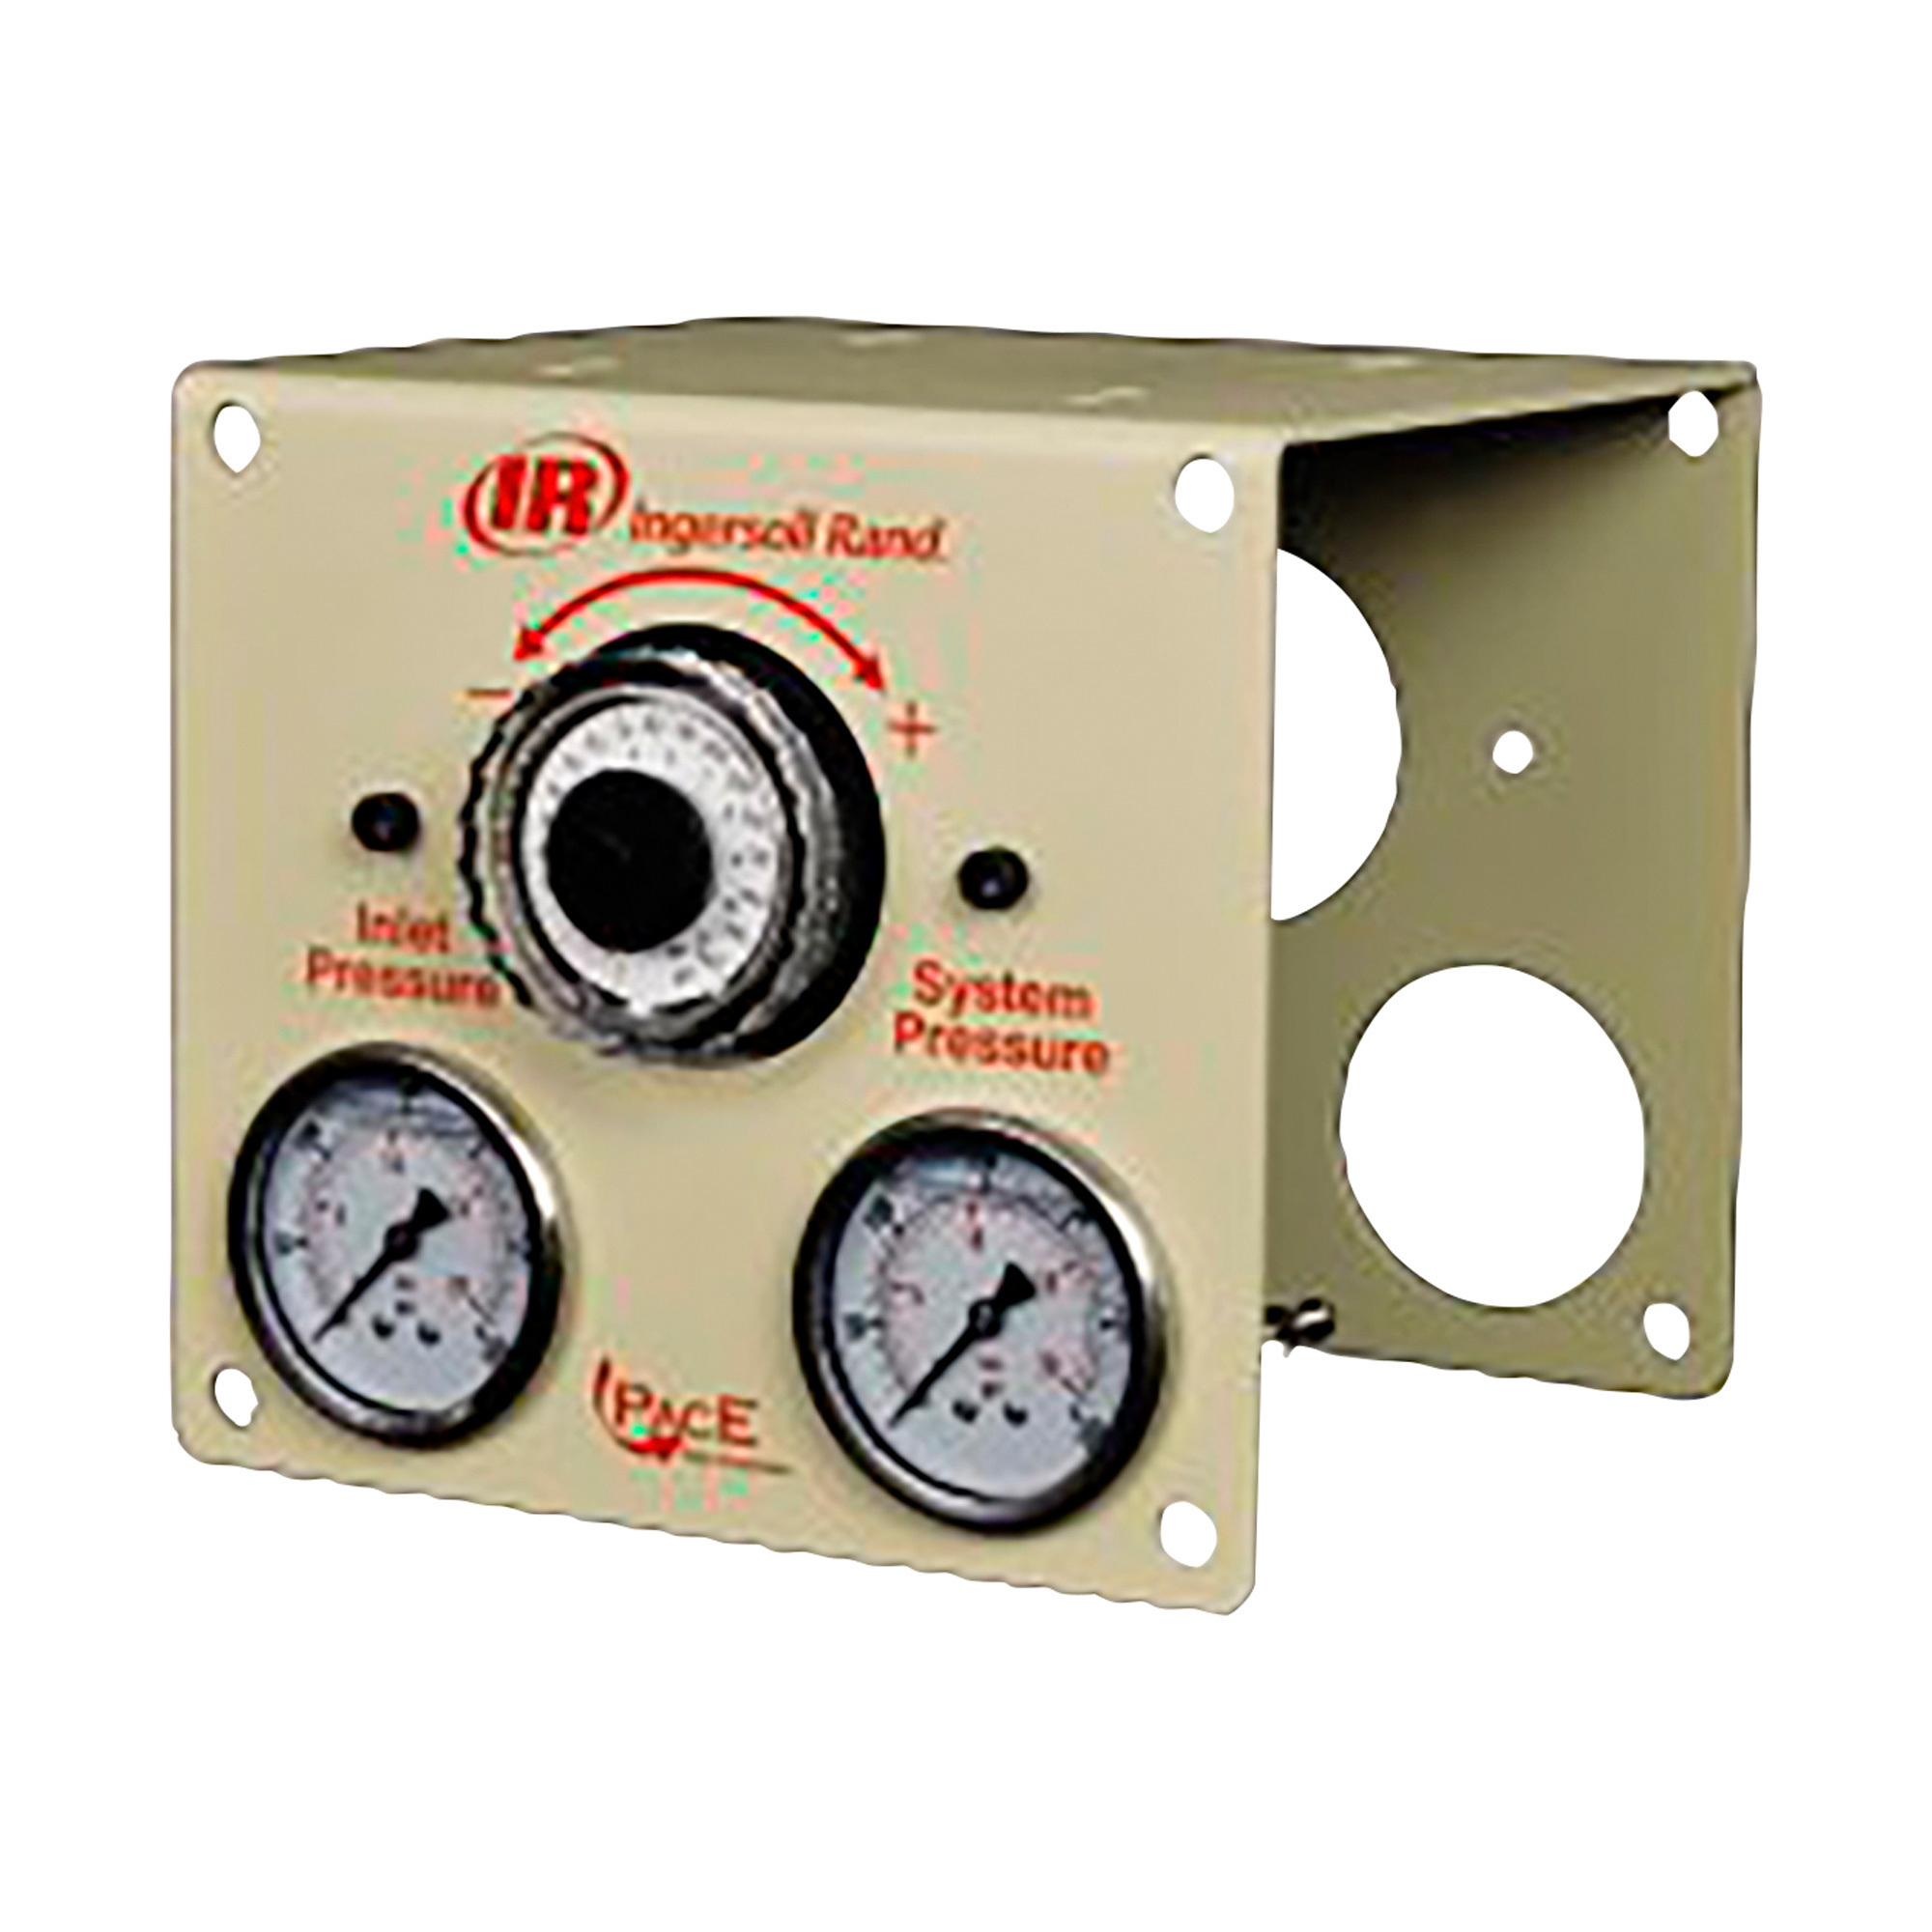 Ingersoll Rand PacE Flow Controller, 1/2Inch NPT, Right To Left Flow, Model 49124399